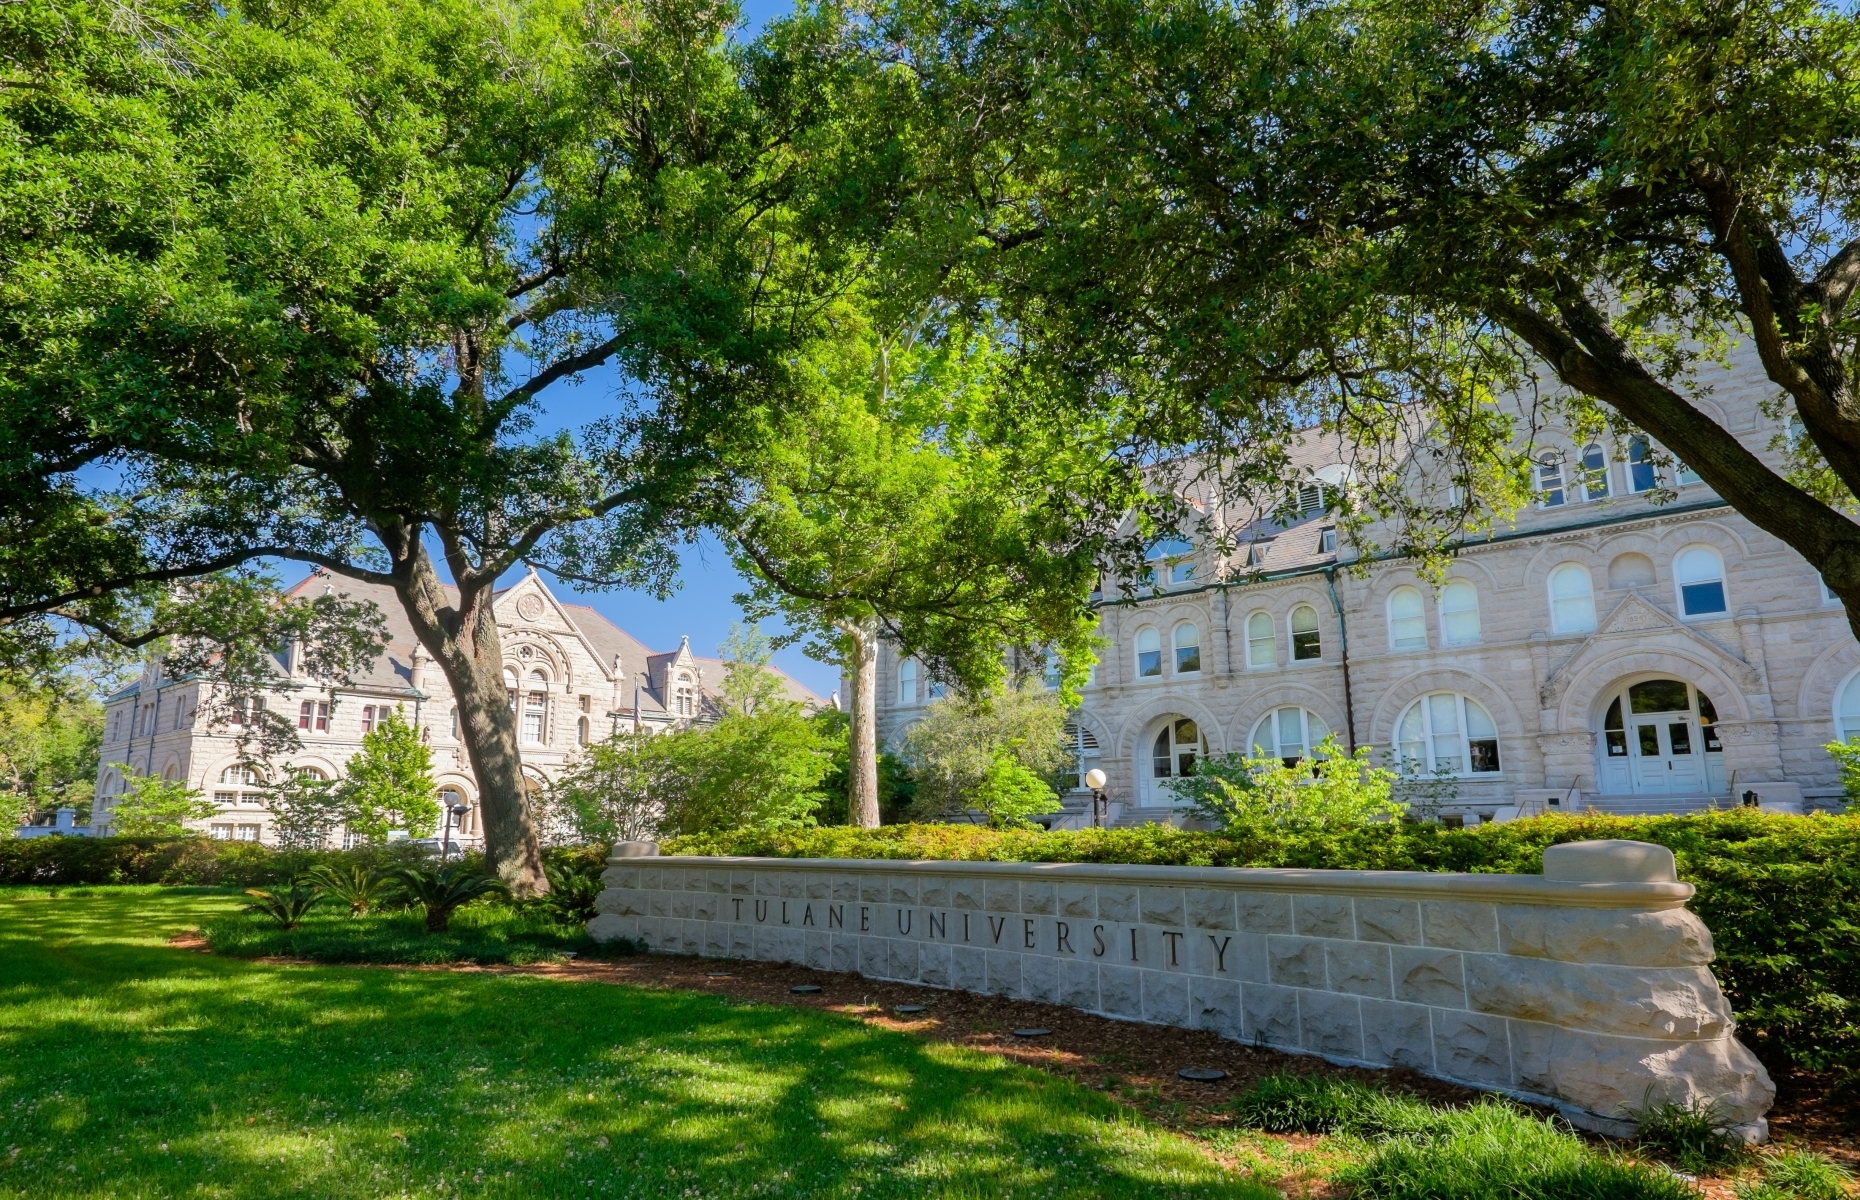 <p><a href="http://tulane.edu/" rel="noreferrer noopener">Tulane University</a> in New Orleans has elegant white stone buildings and plenty of space to relax on the large quads lined with oak and cypress trees.</p>